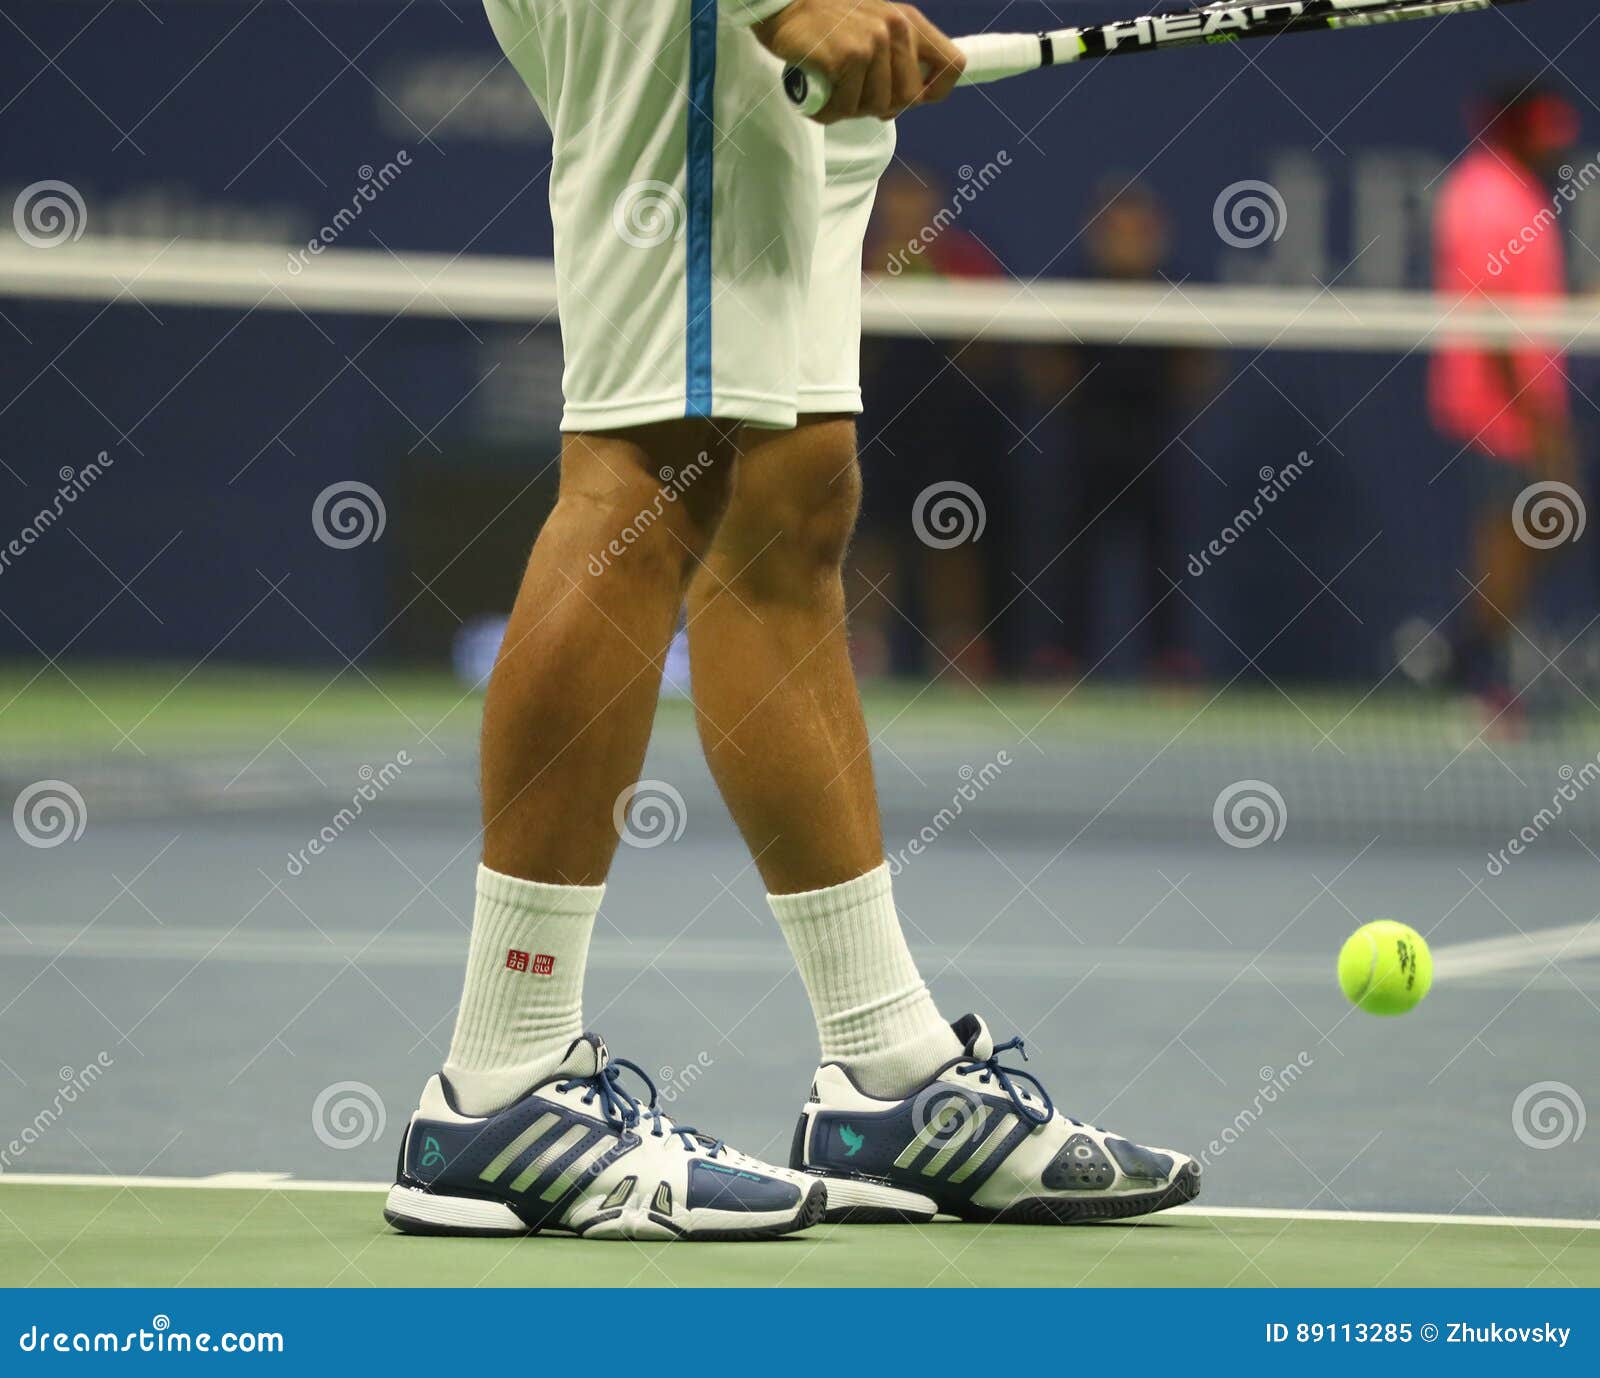 Grand Slam Novak of Serbia Wears Custom Adidas Tennis Shoes during Match at US Open 2016 Editorial Image Image of billie: 89113285